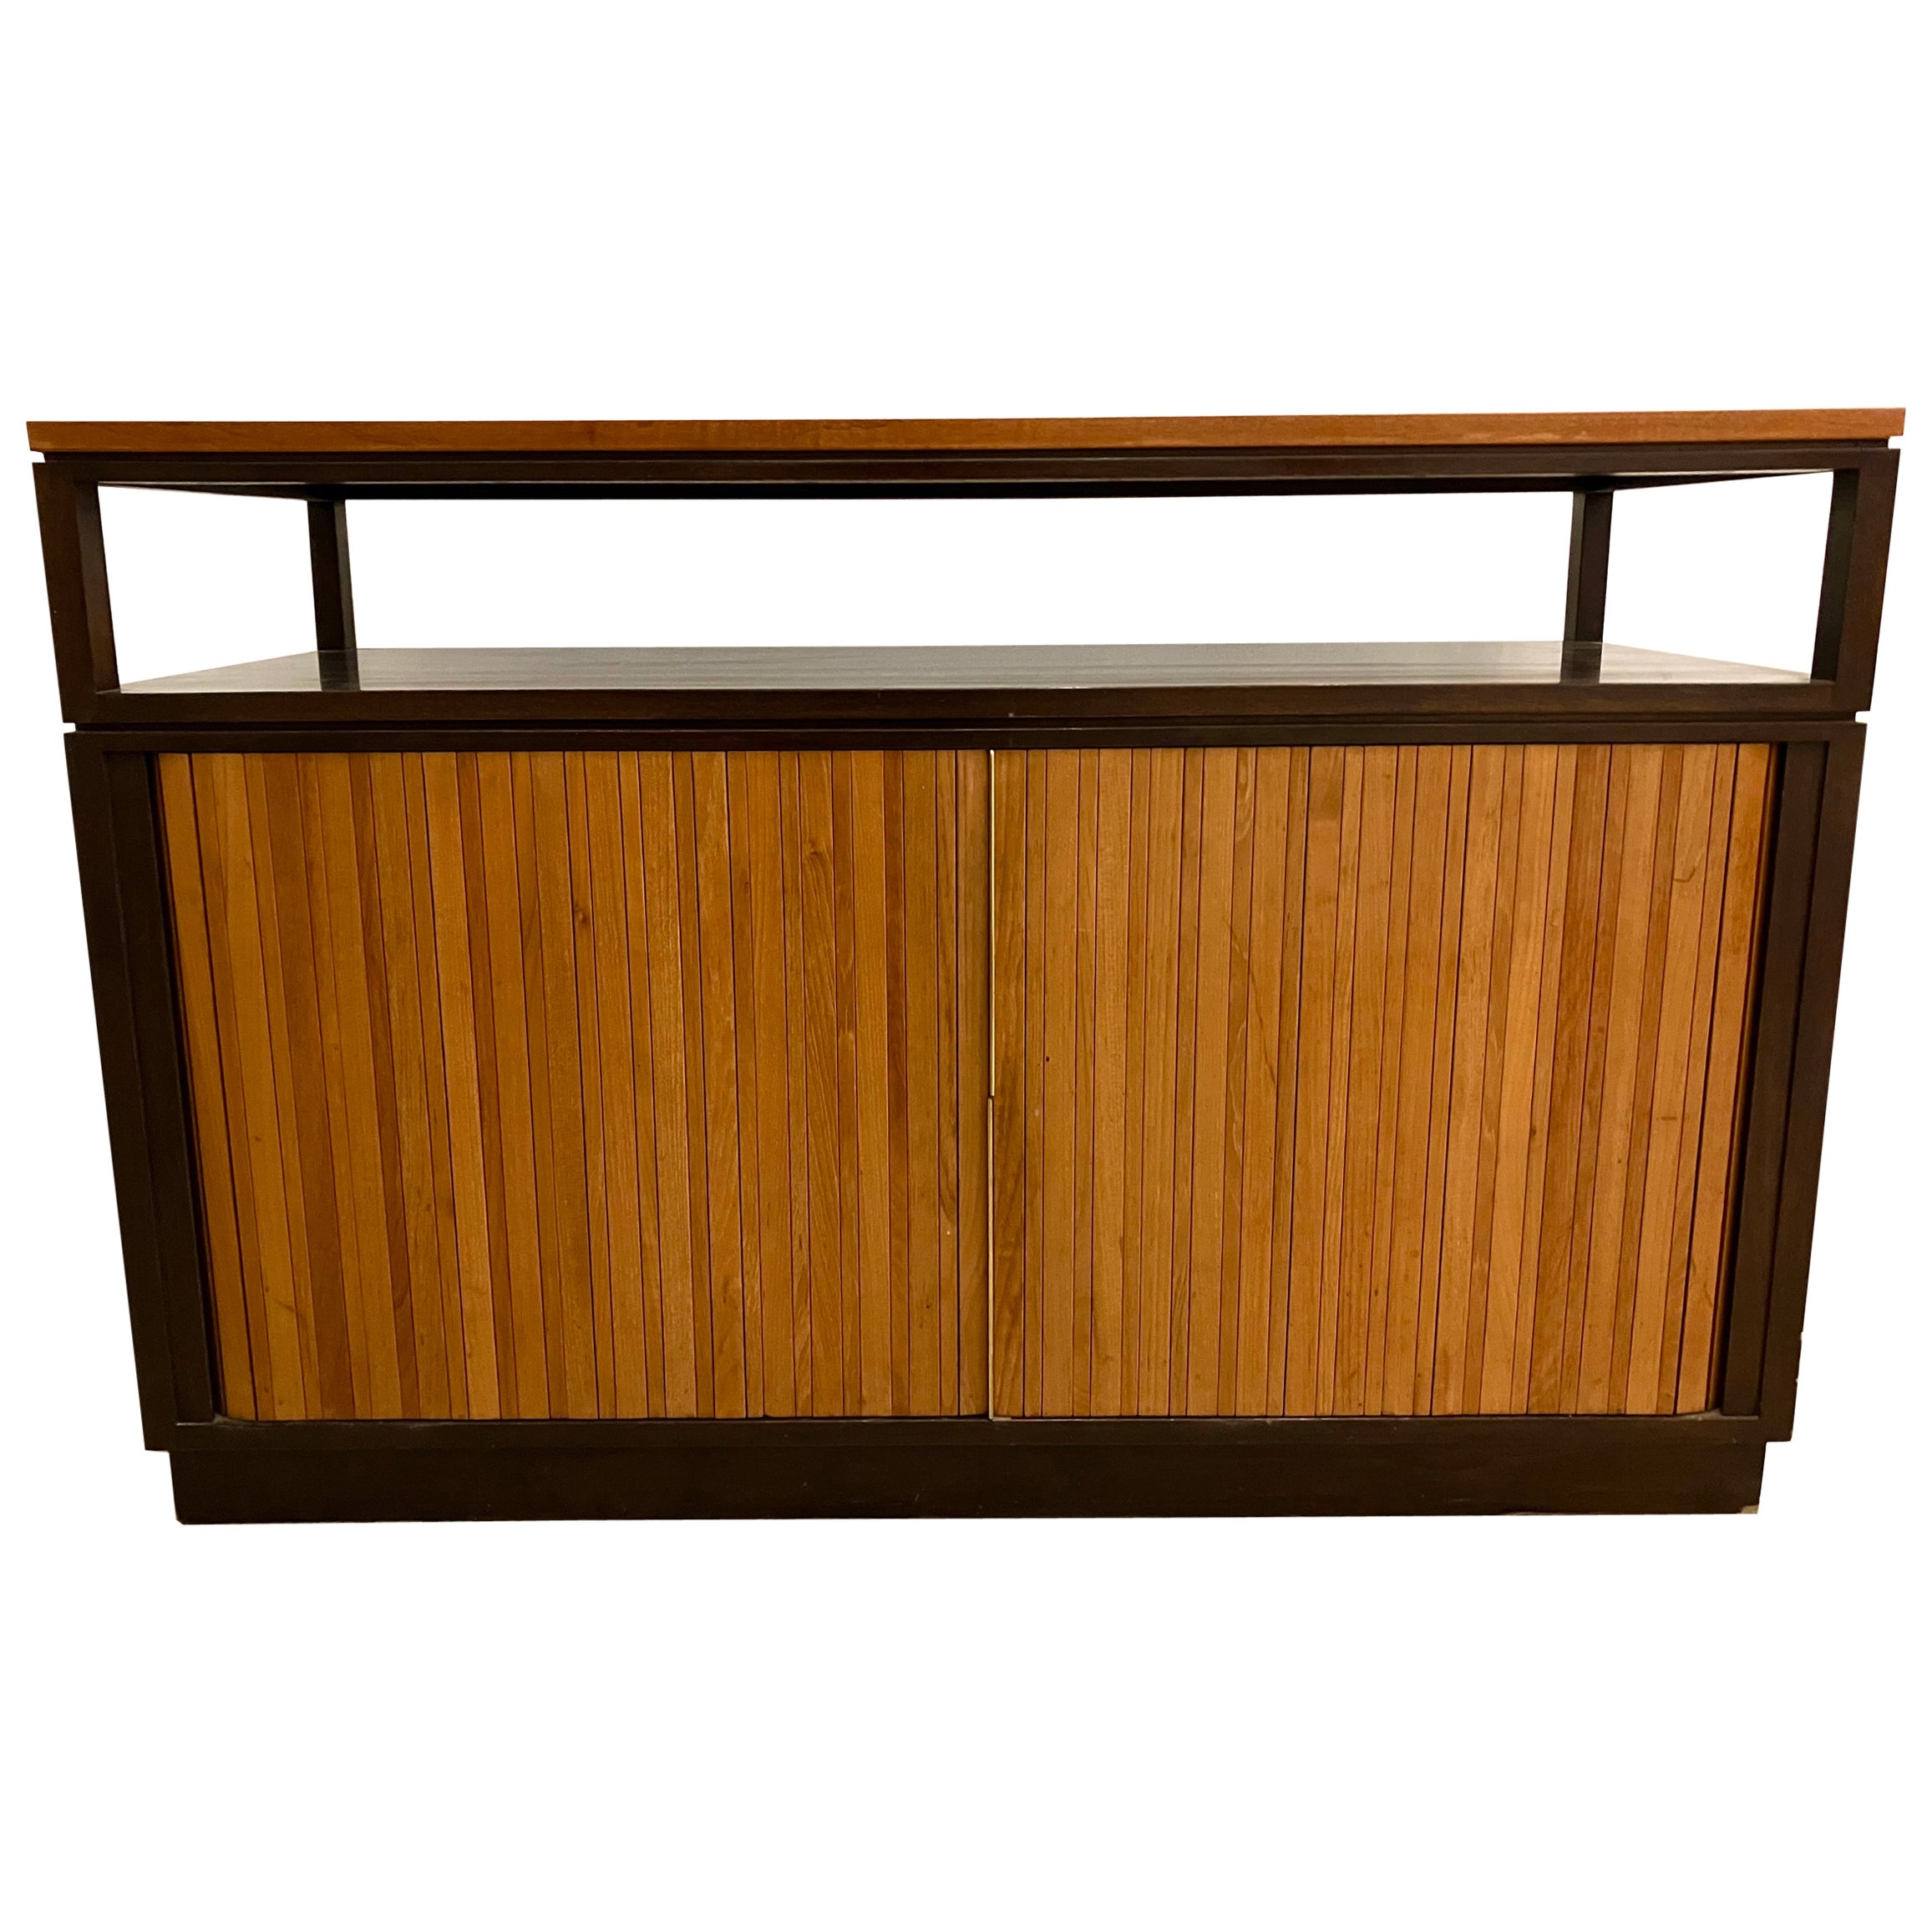 Tambour Door Cabinet by Edward Wormley for Dunbar, Model 959